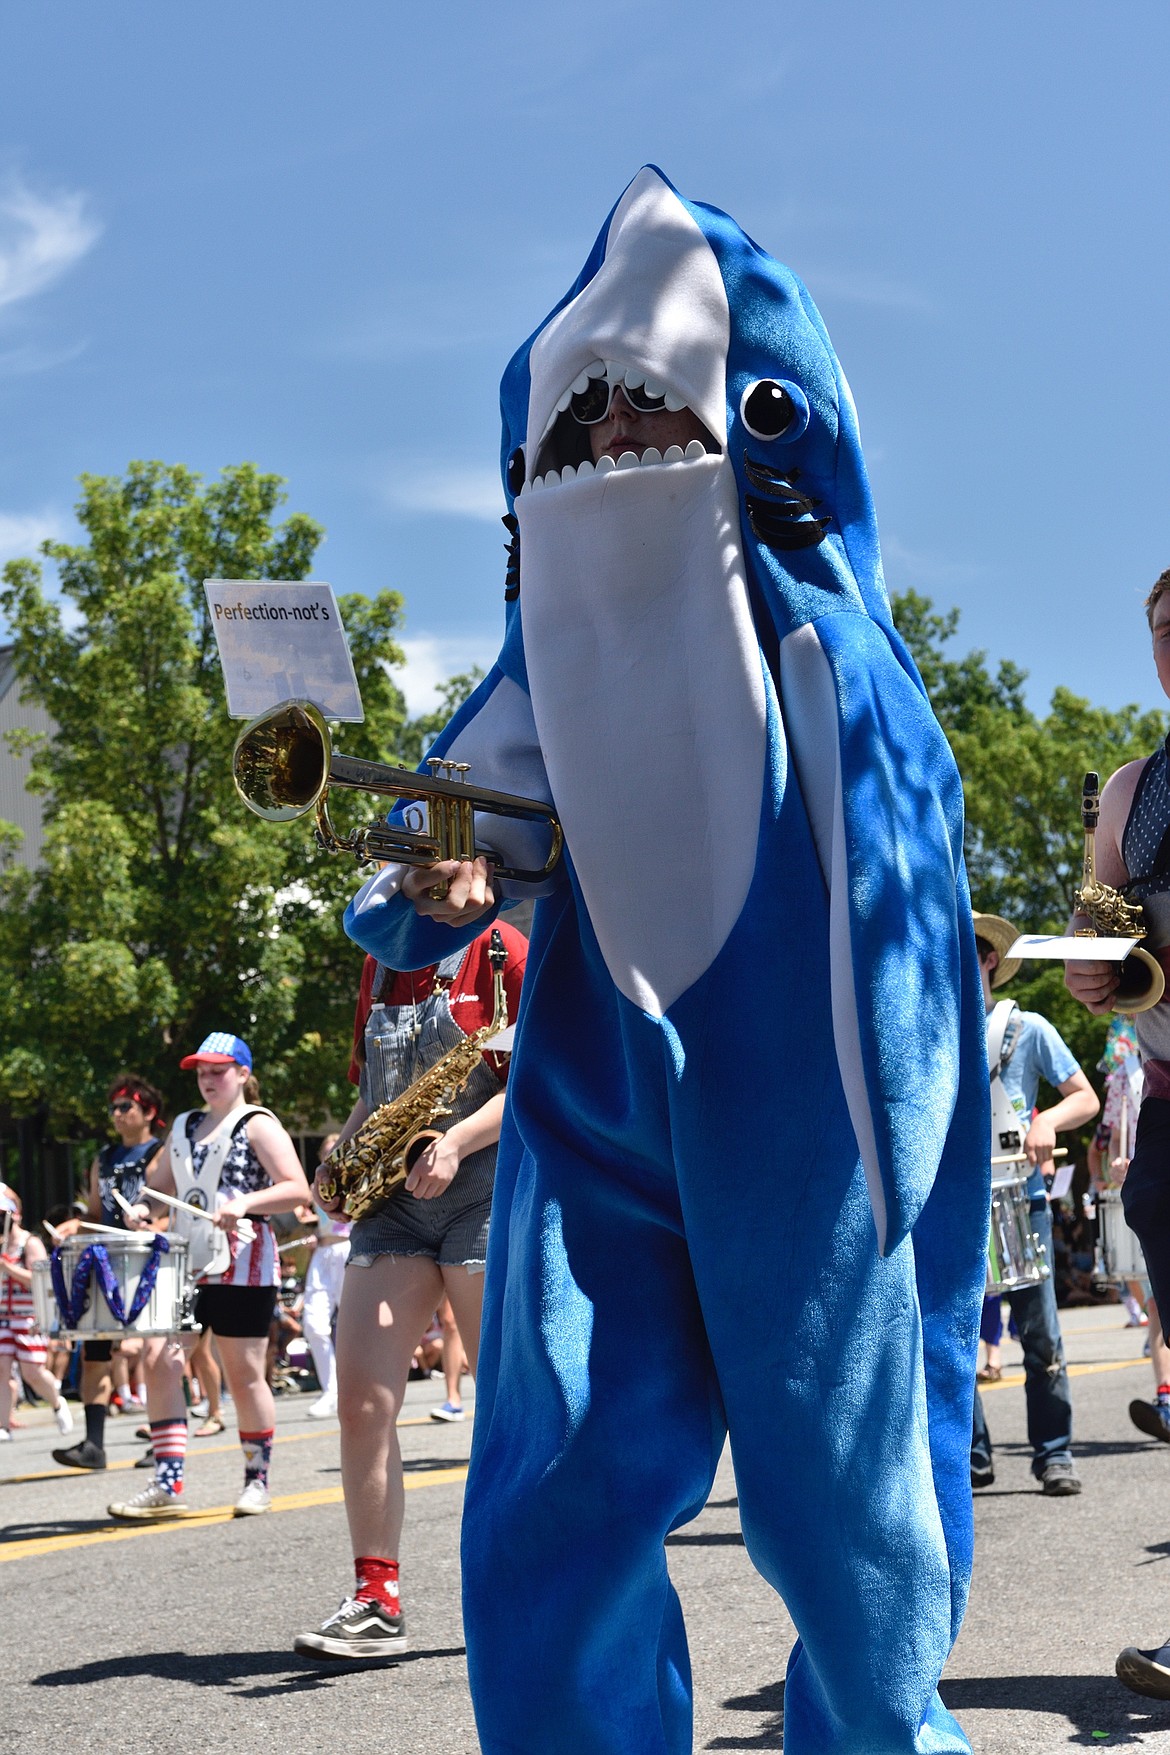 Left Shark, who marched on the left side of the formation, plays trumpet for the Perfection-Nots. JIM MOWREADER/Press